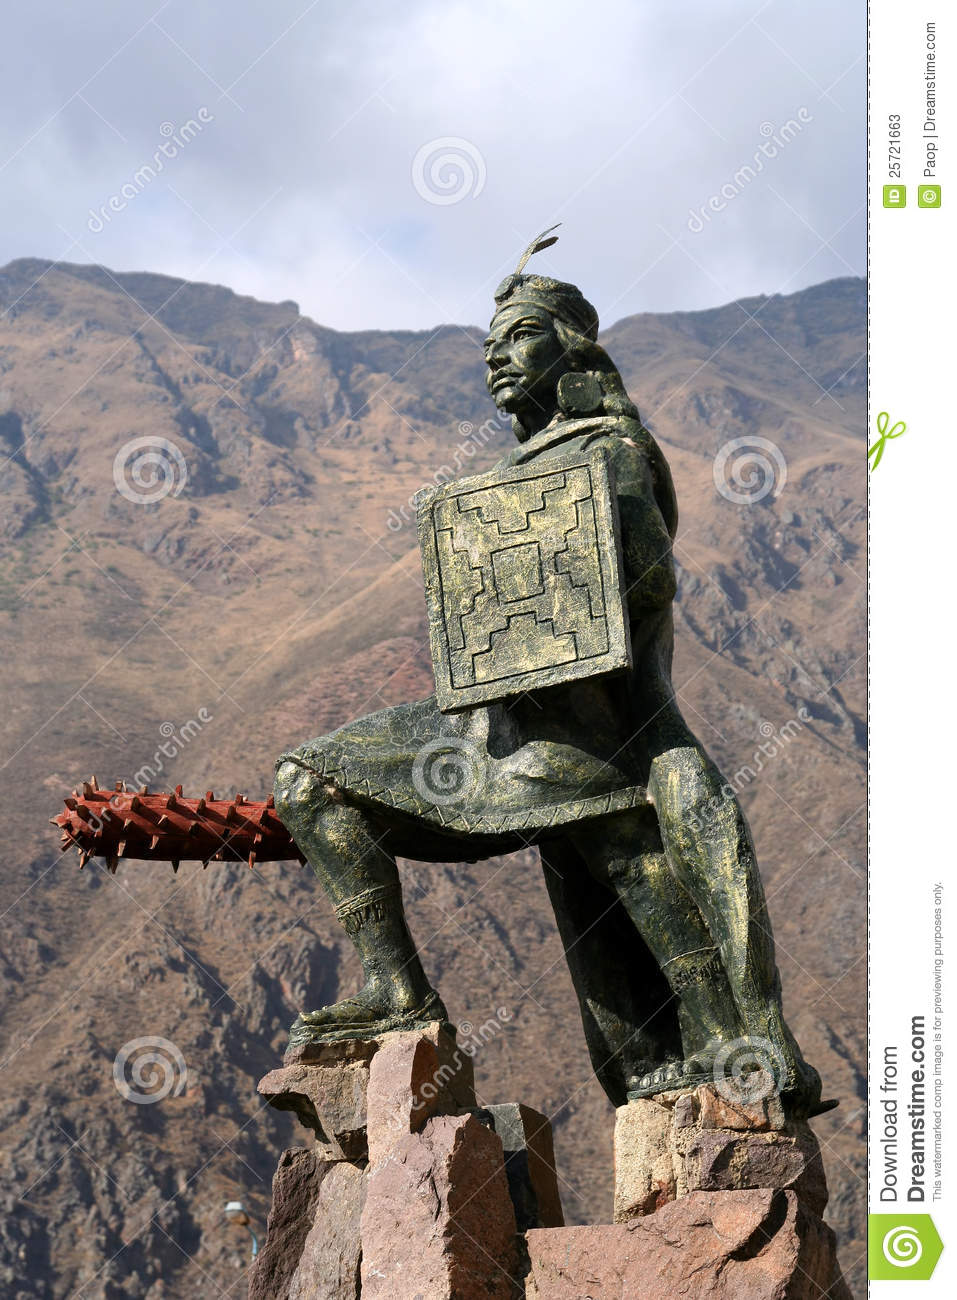 Statue Of Incan Warrior In The Small Town Of Ollantaytambo In Peru